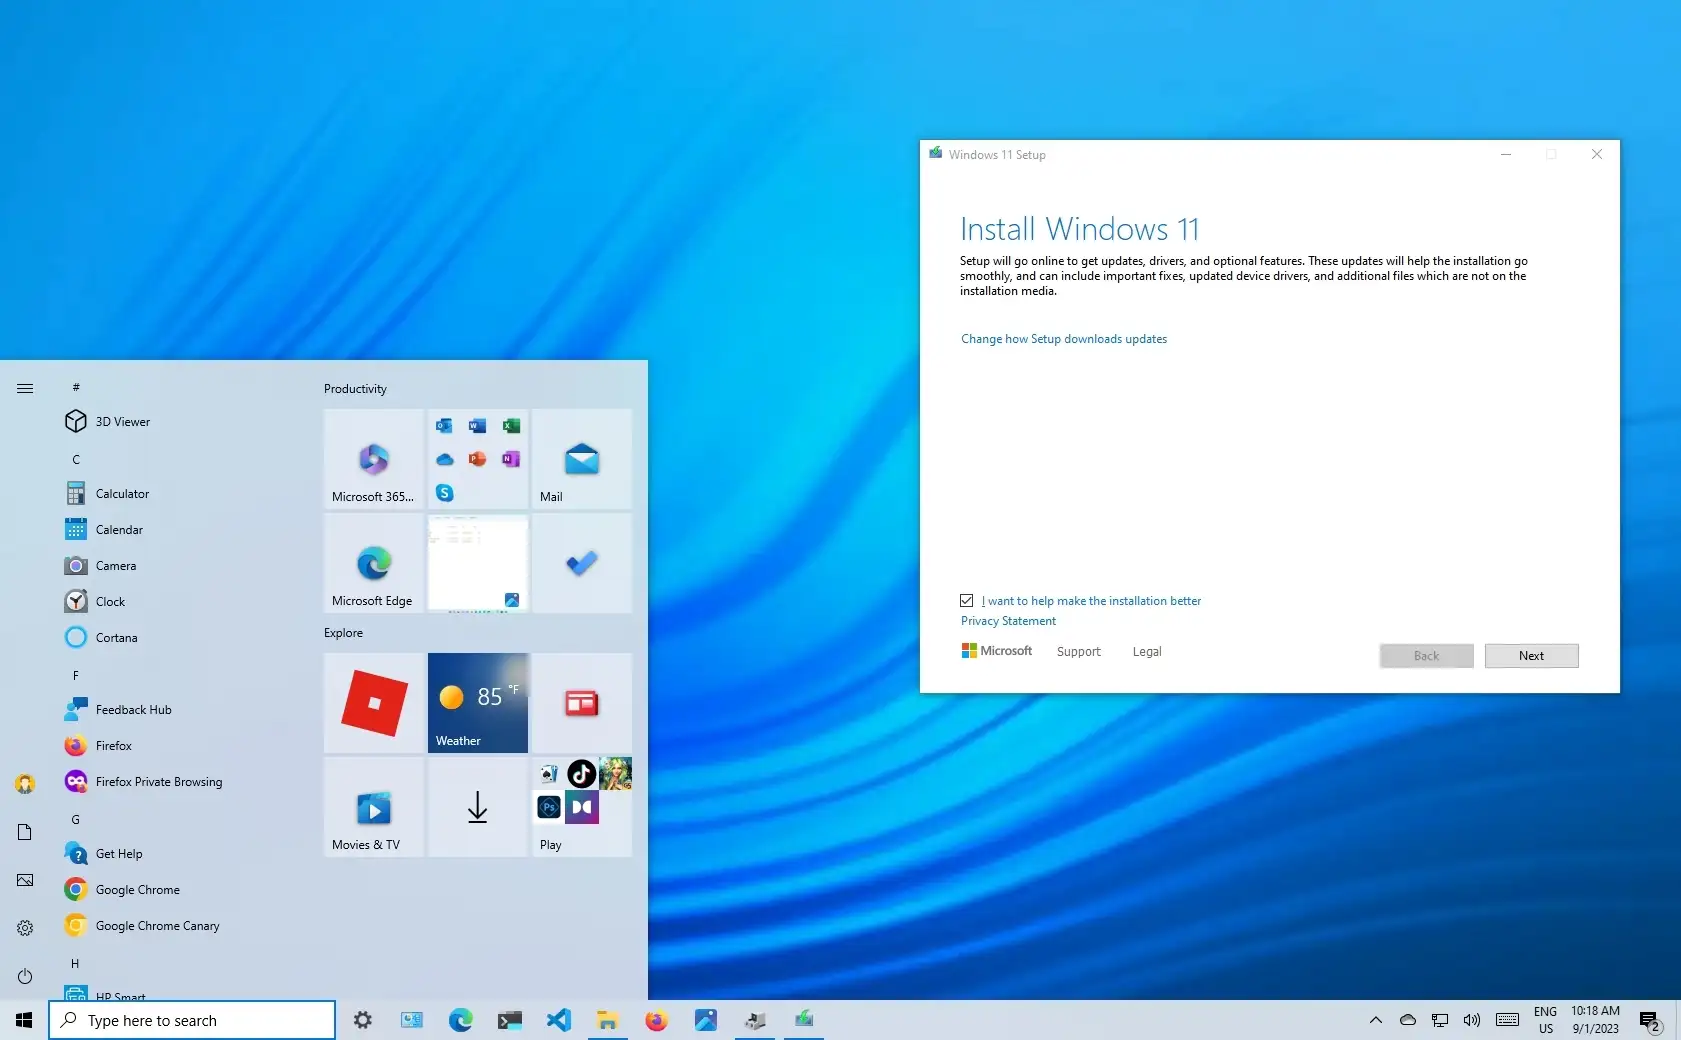 How to download Windows 11 23H2 ISO (preview) - Pureinfotech